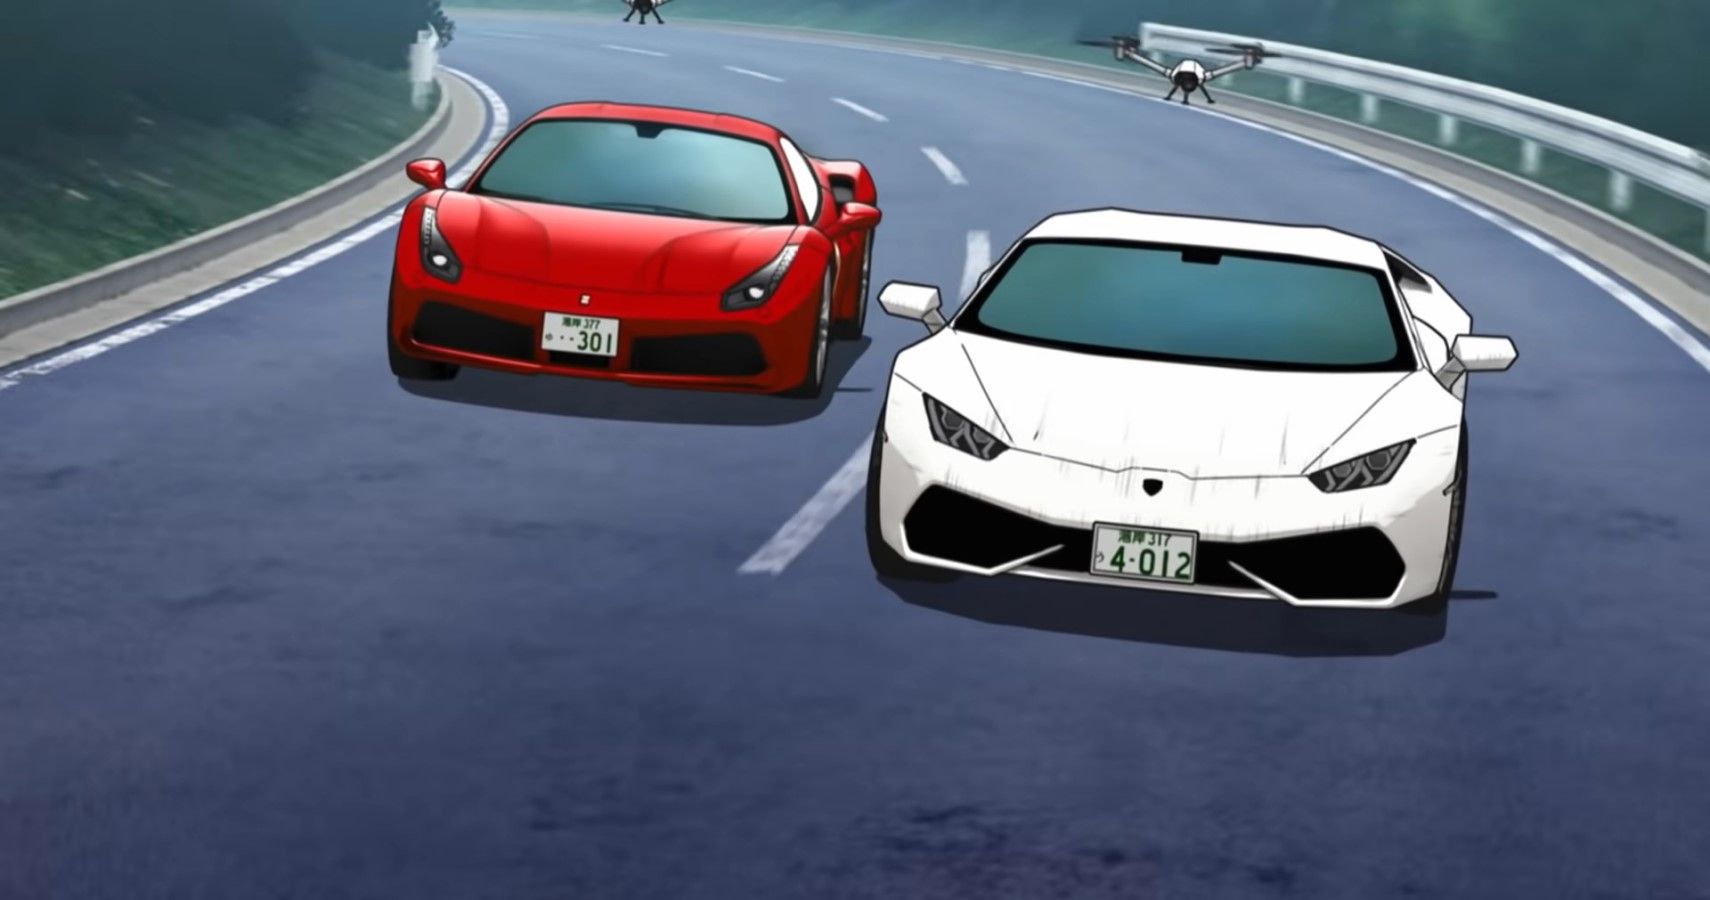 Ferraris and Lamborghinis will also join the screen